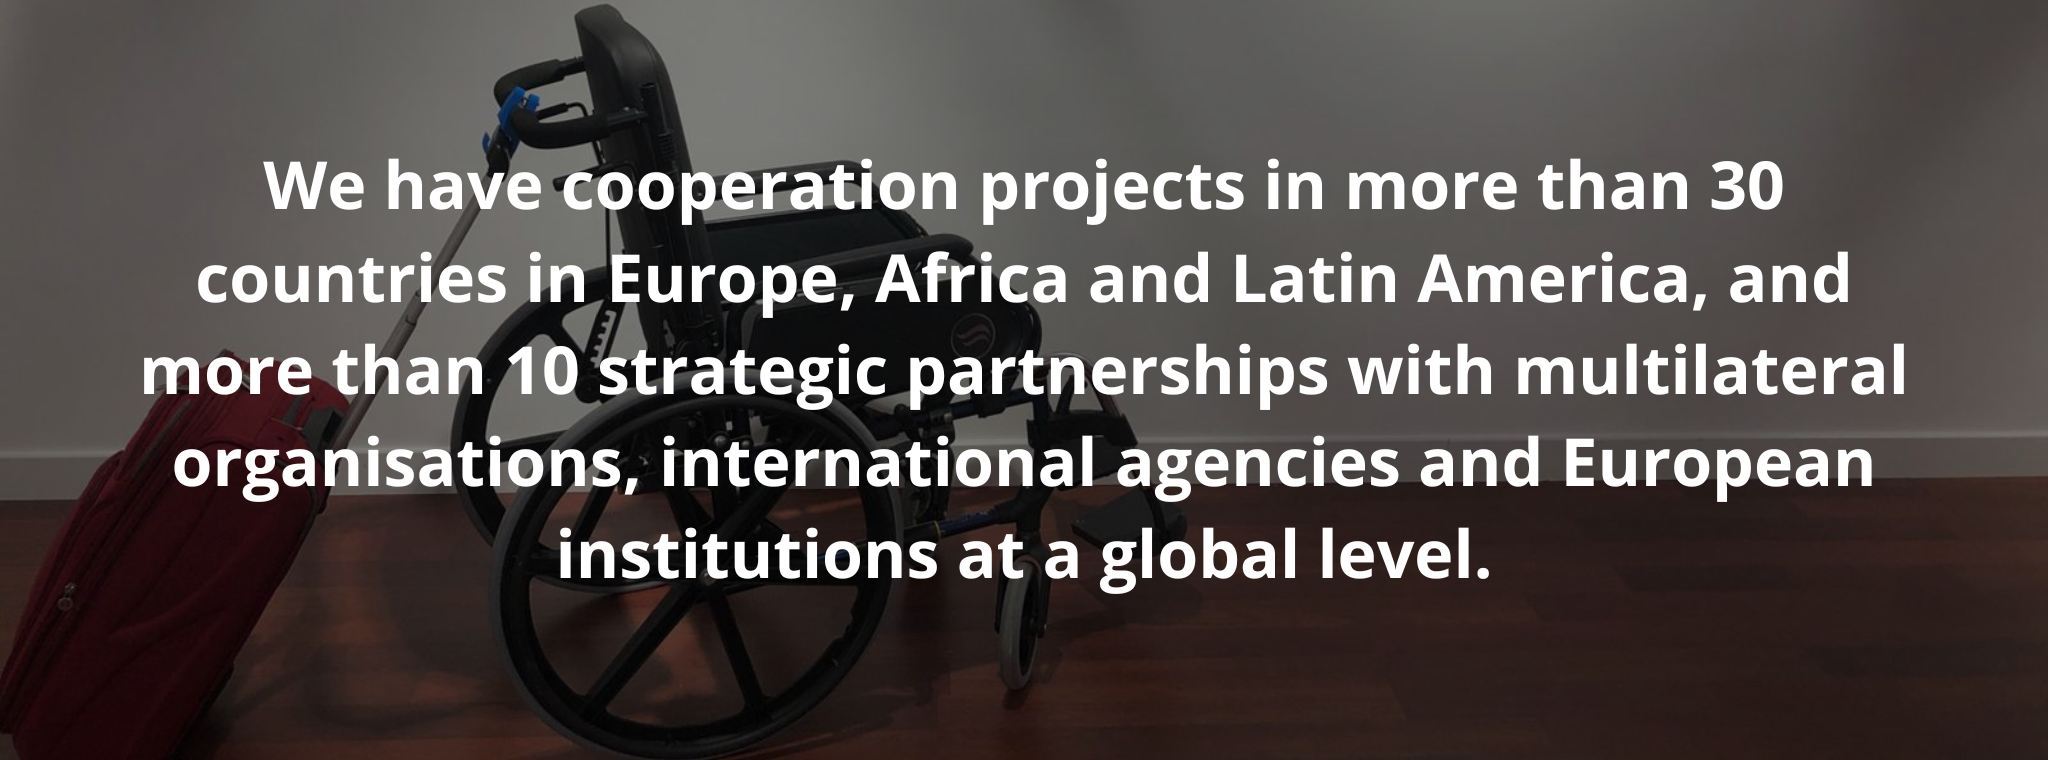 We have cooperation projects in more than 30 countries in Europe, Africa and Latin America, and more than 10 strategic partnerships with multilateral organisations, international agencies and European institutions at a global level.